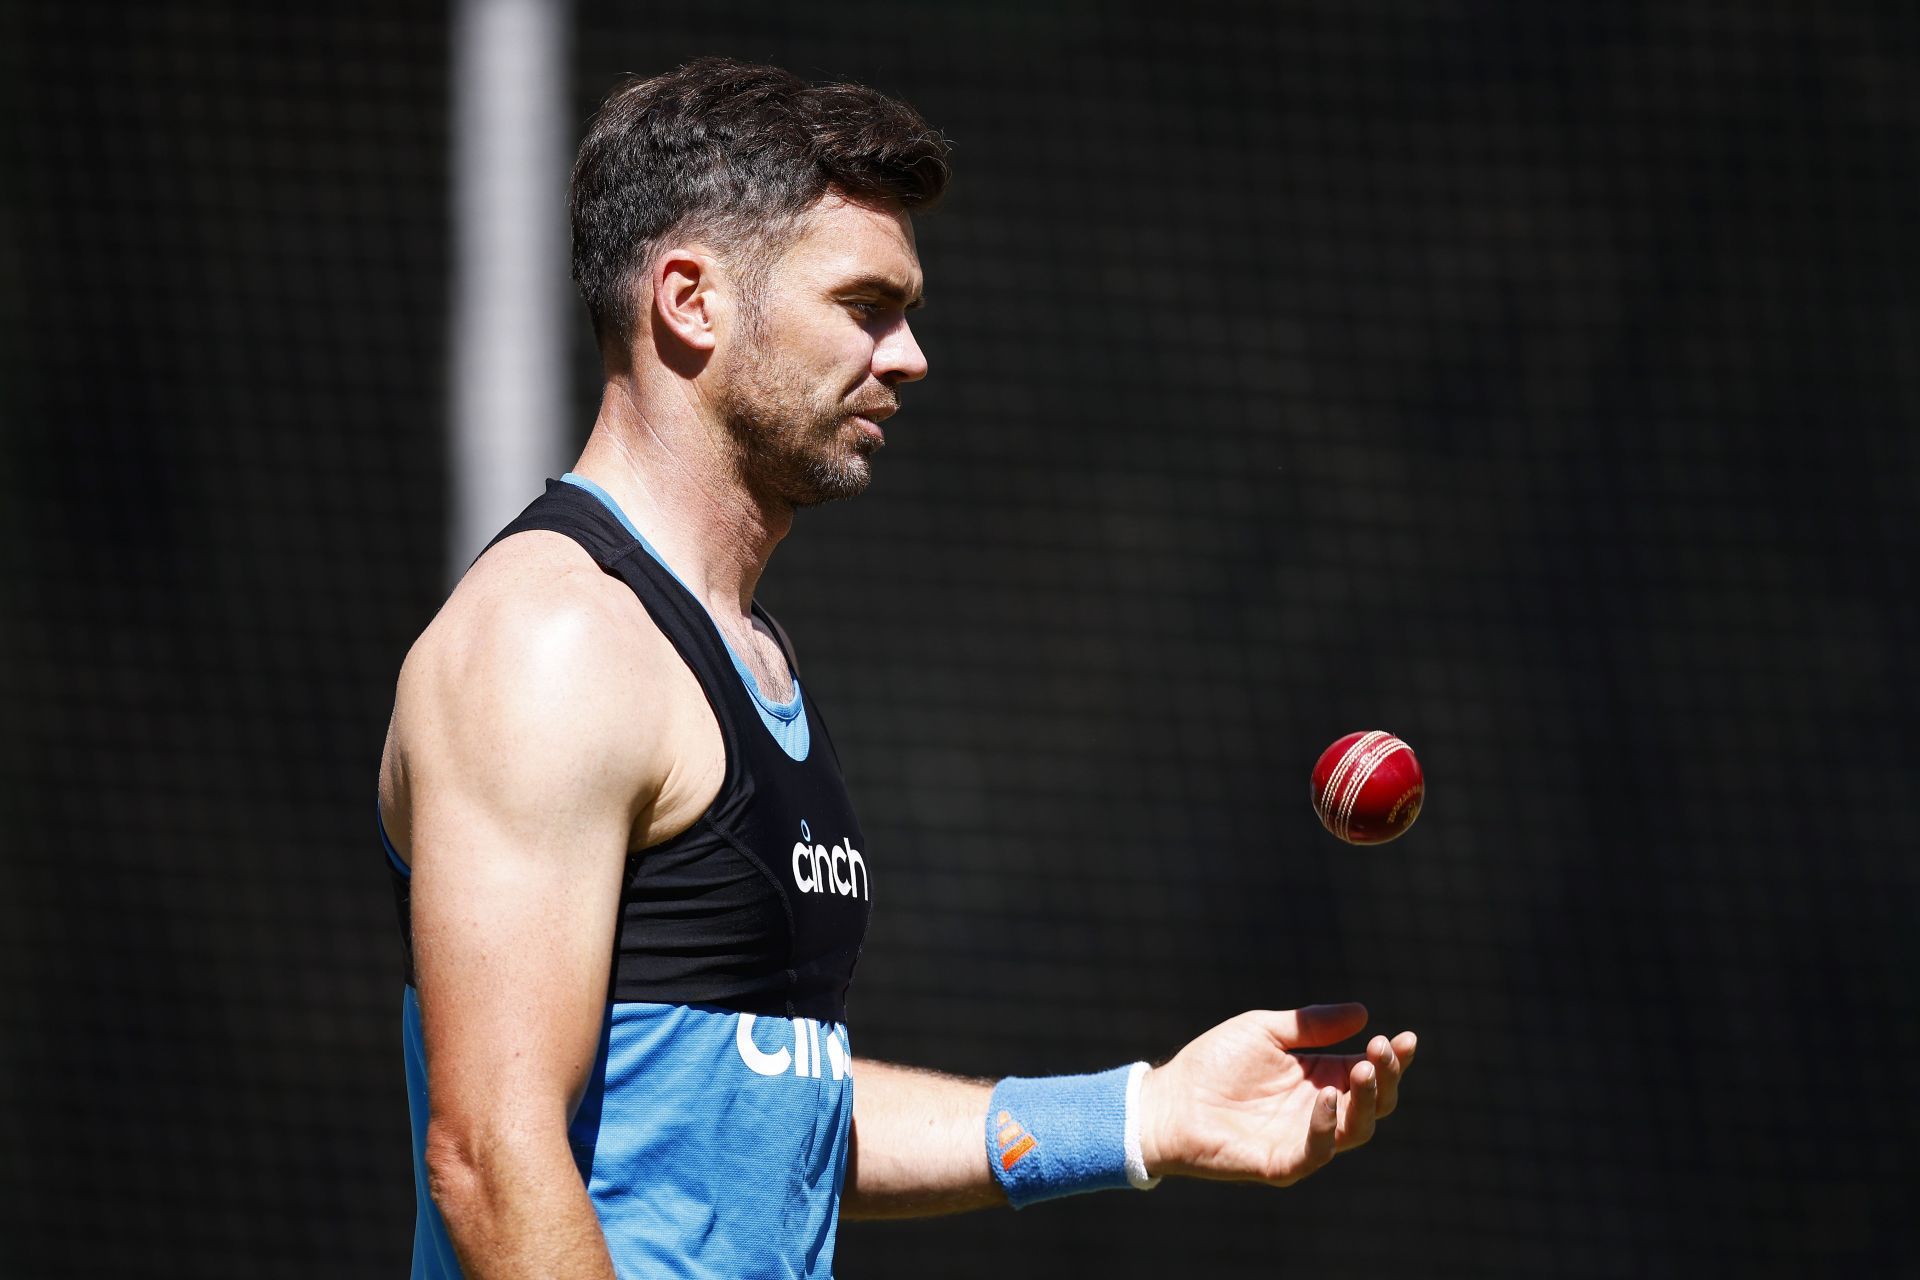 James Anderson. (Image Credits: Getty)